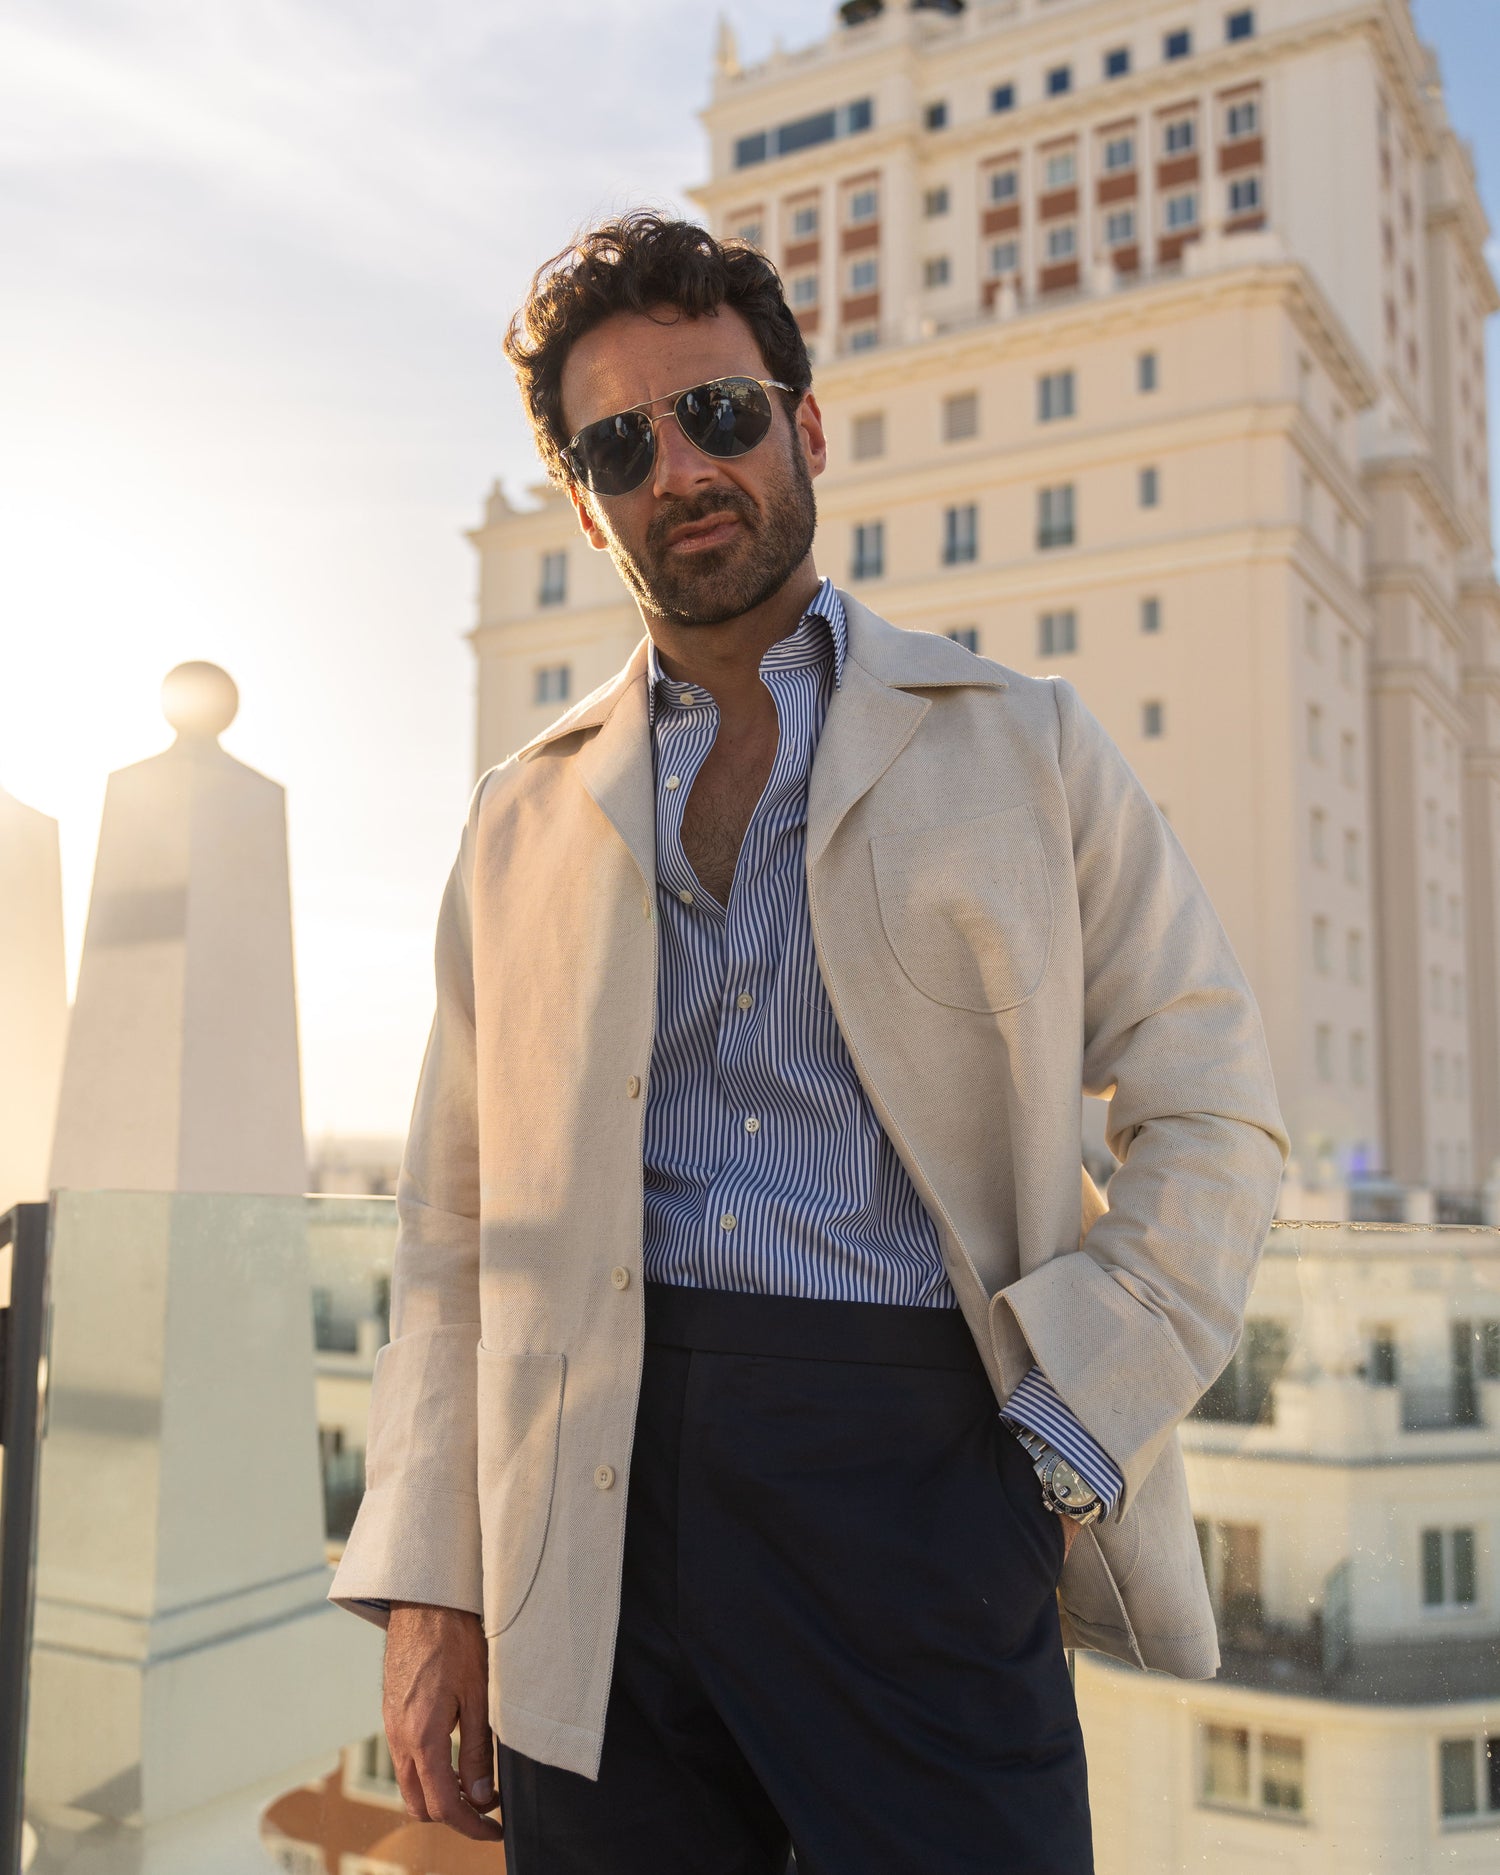 Model outside wearing the linen shirt jacket for men by Luxire in cream wearing sunglasses in front of building